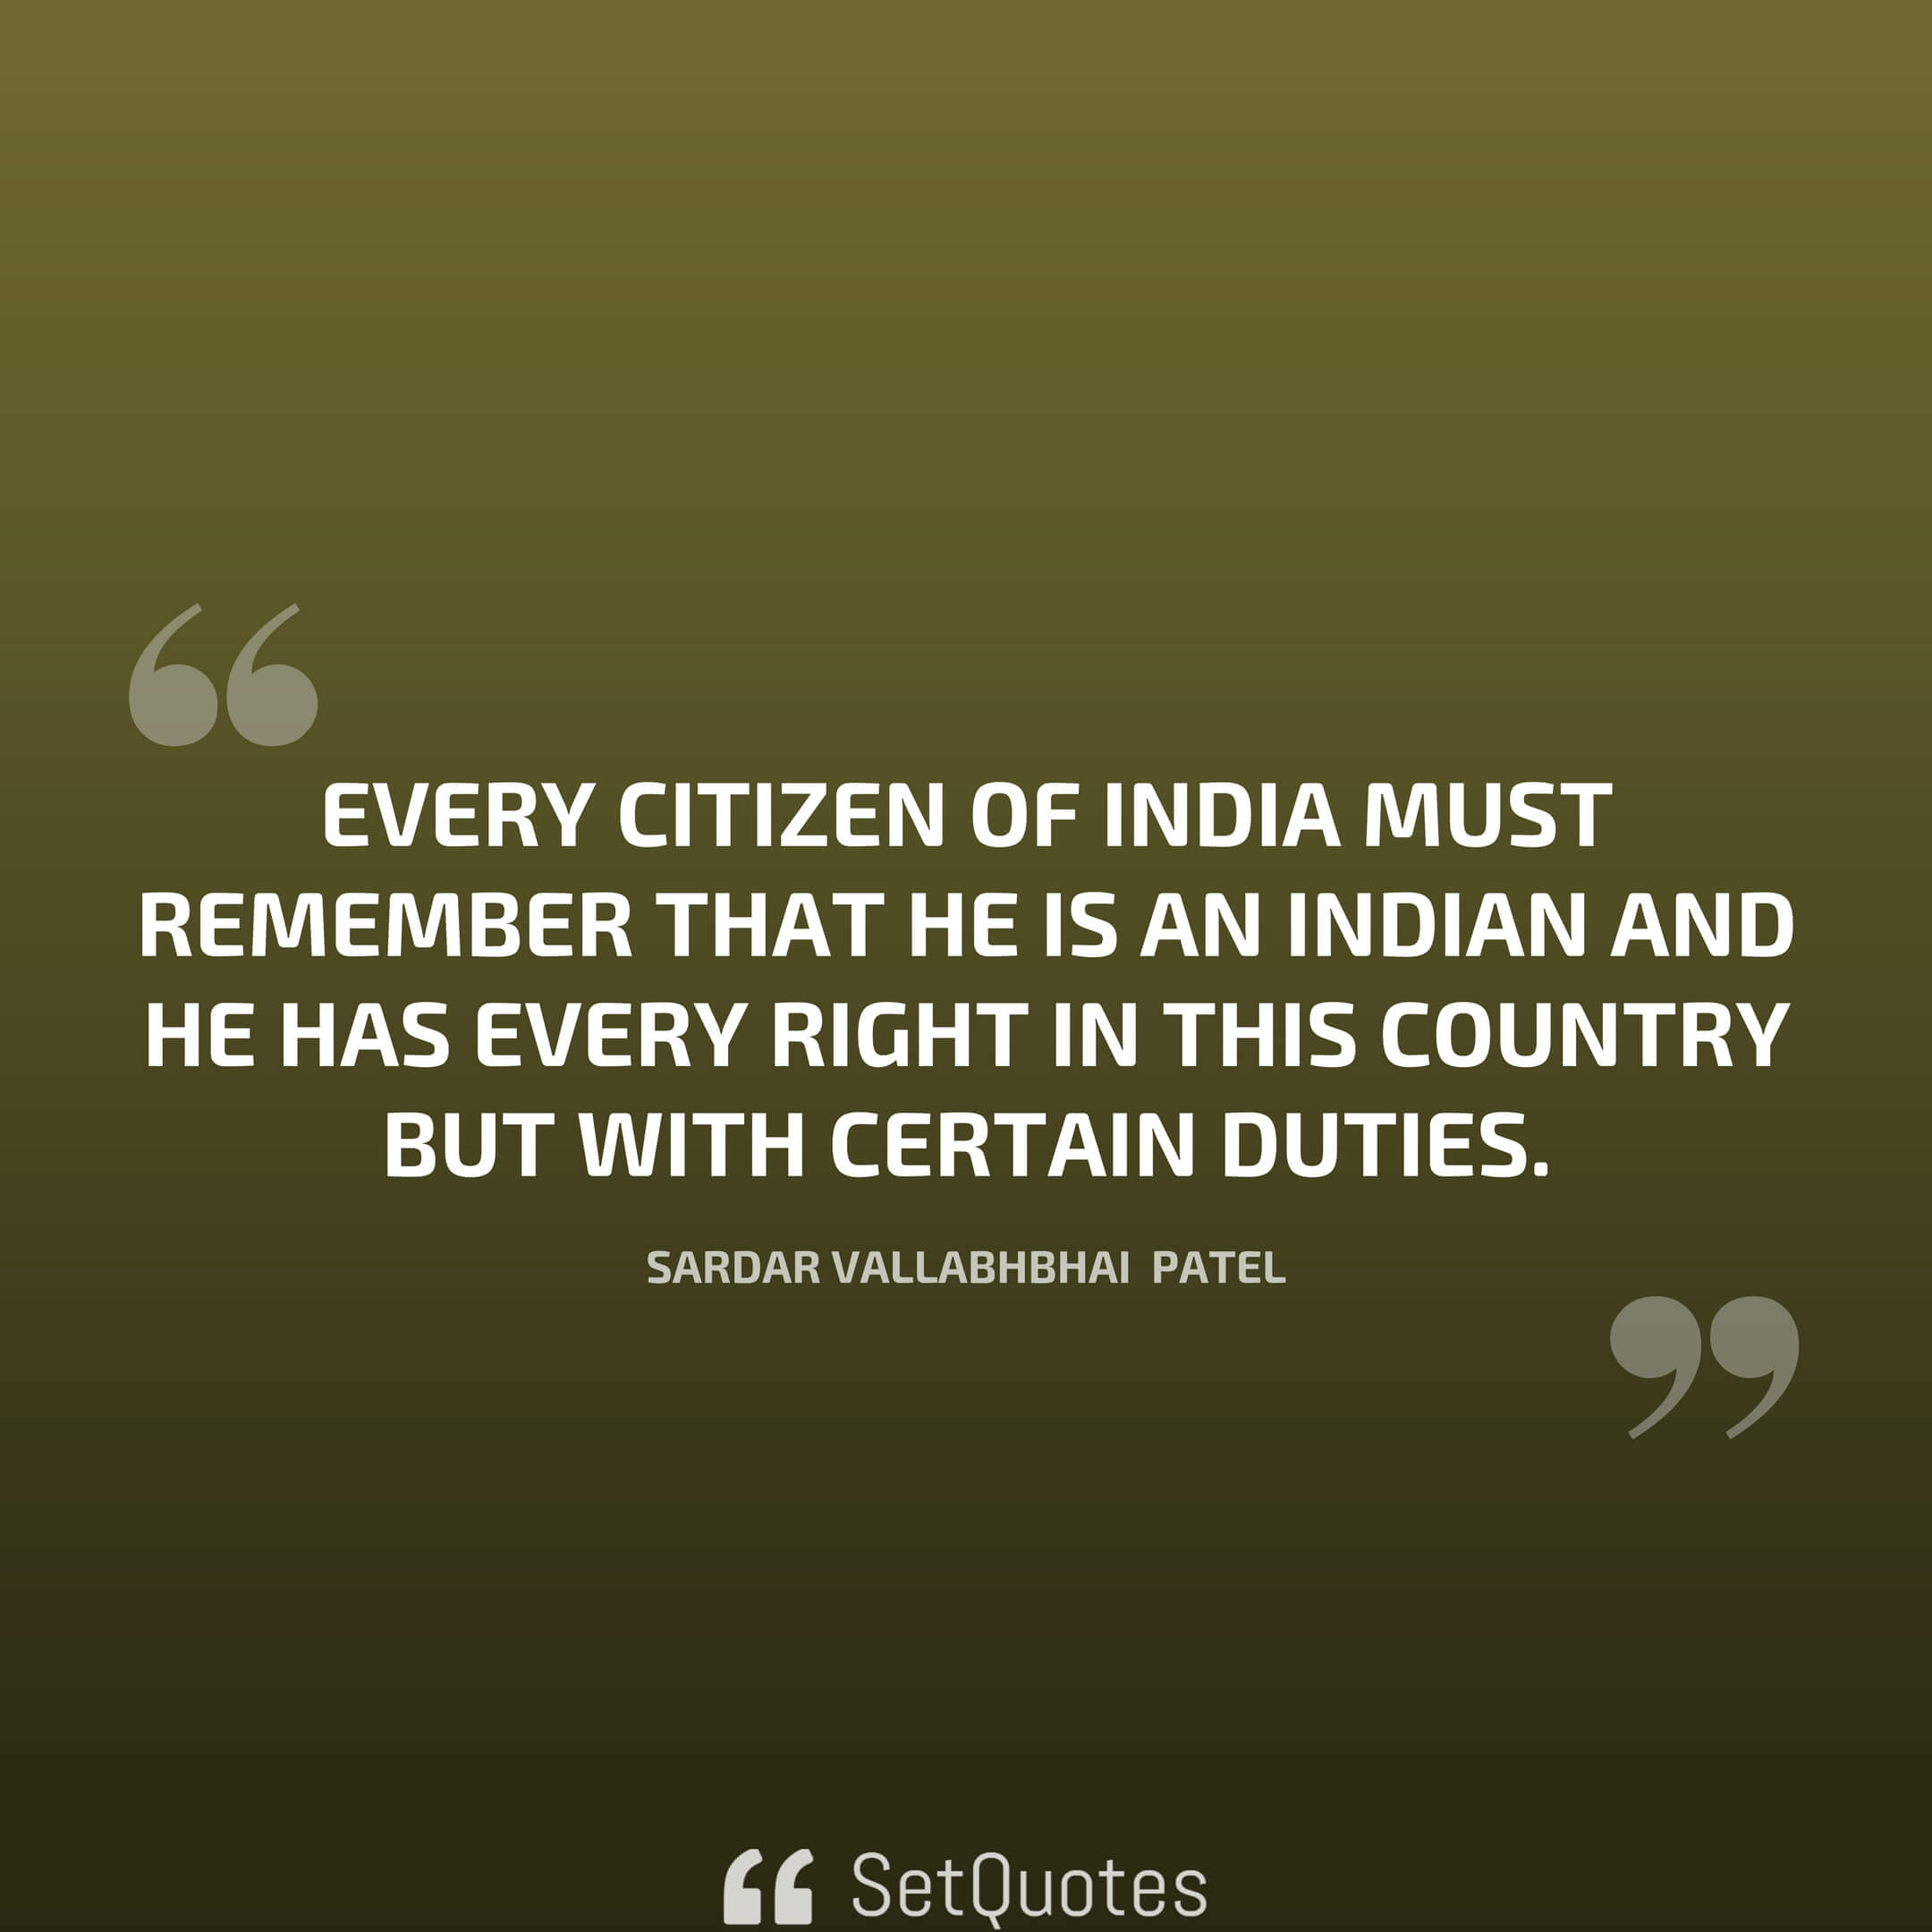 Every citizen of India must remember that he is an Indian and he has every right in this country but with certain duties. - Sardar Vallabhbhai Patel